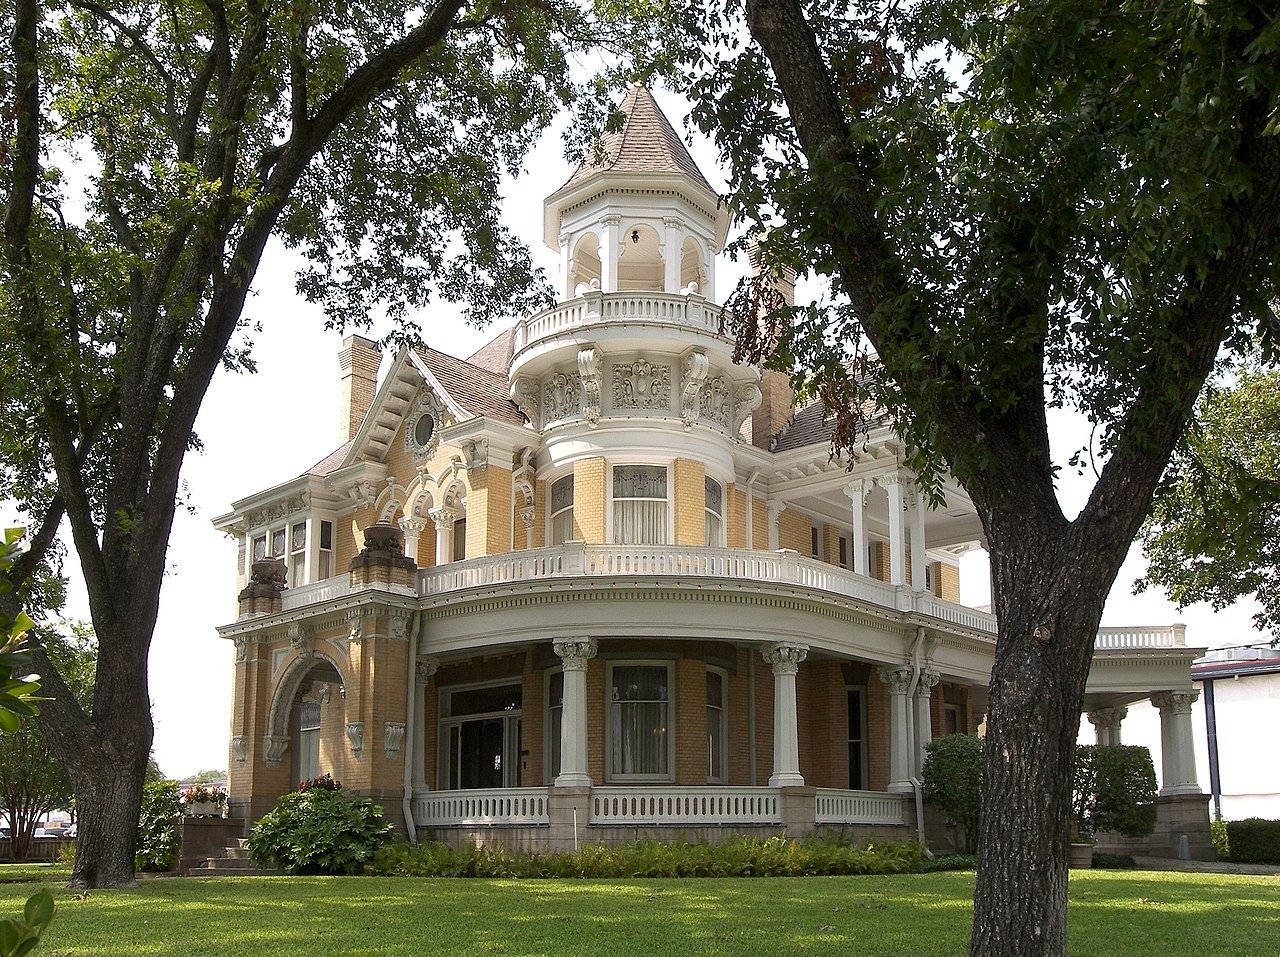 Madison Cooper House in Waco, Texas in 2008